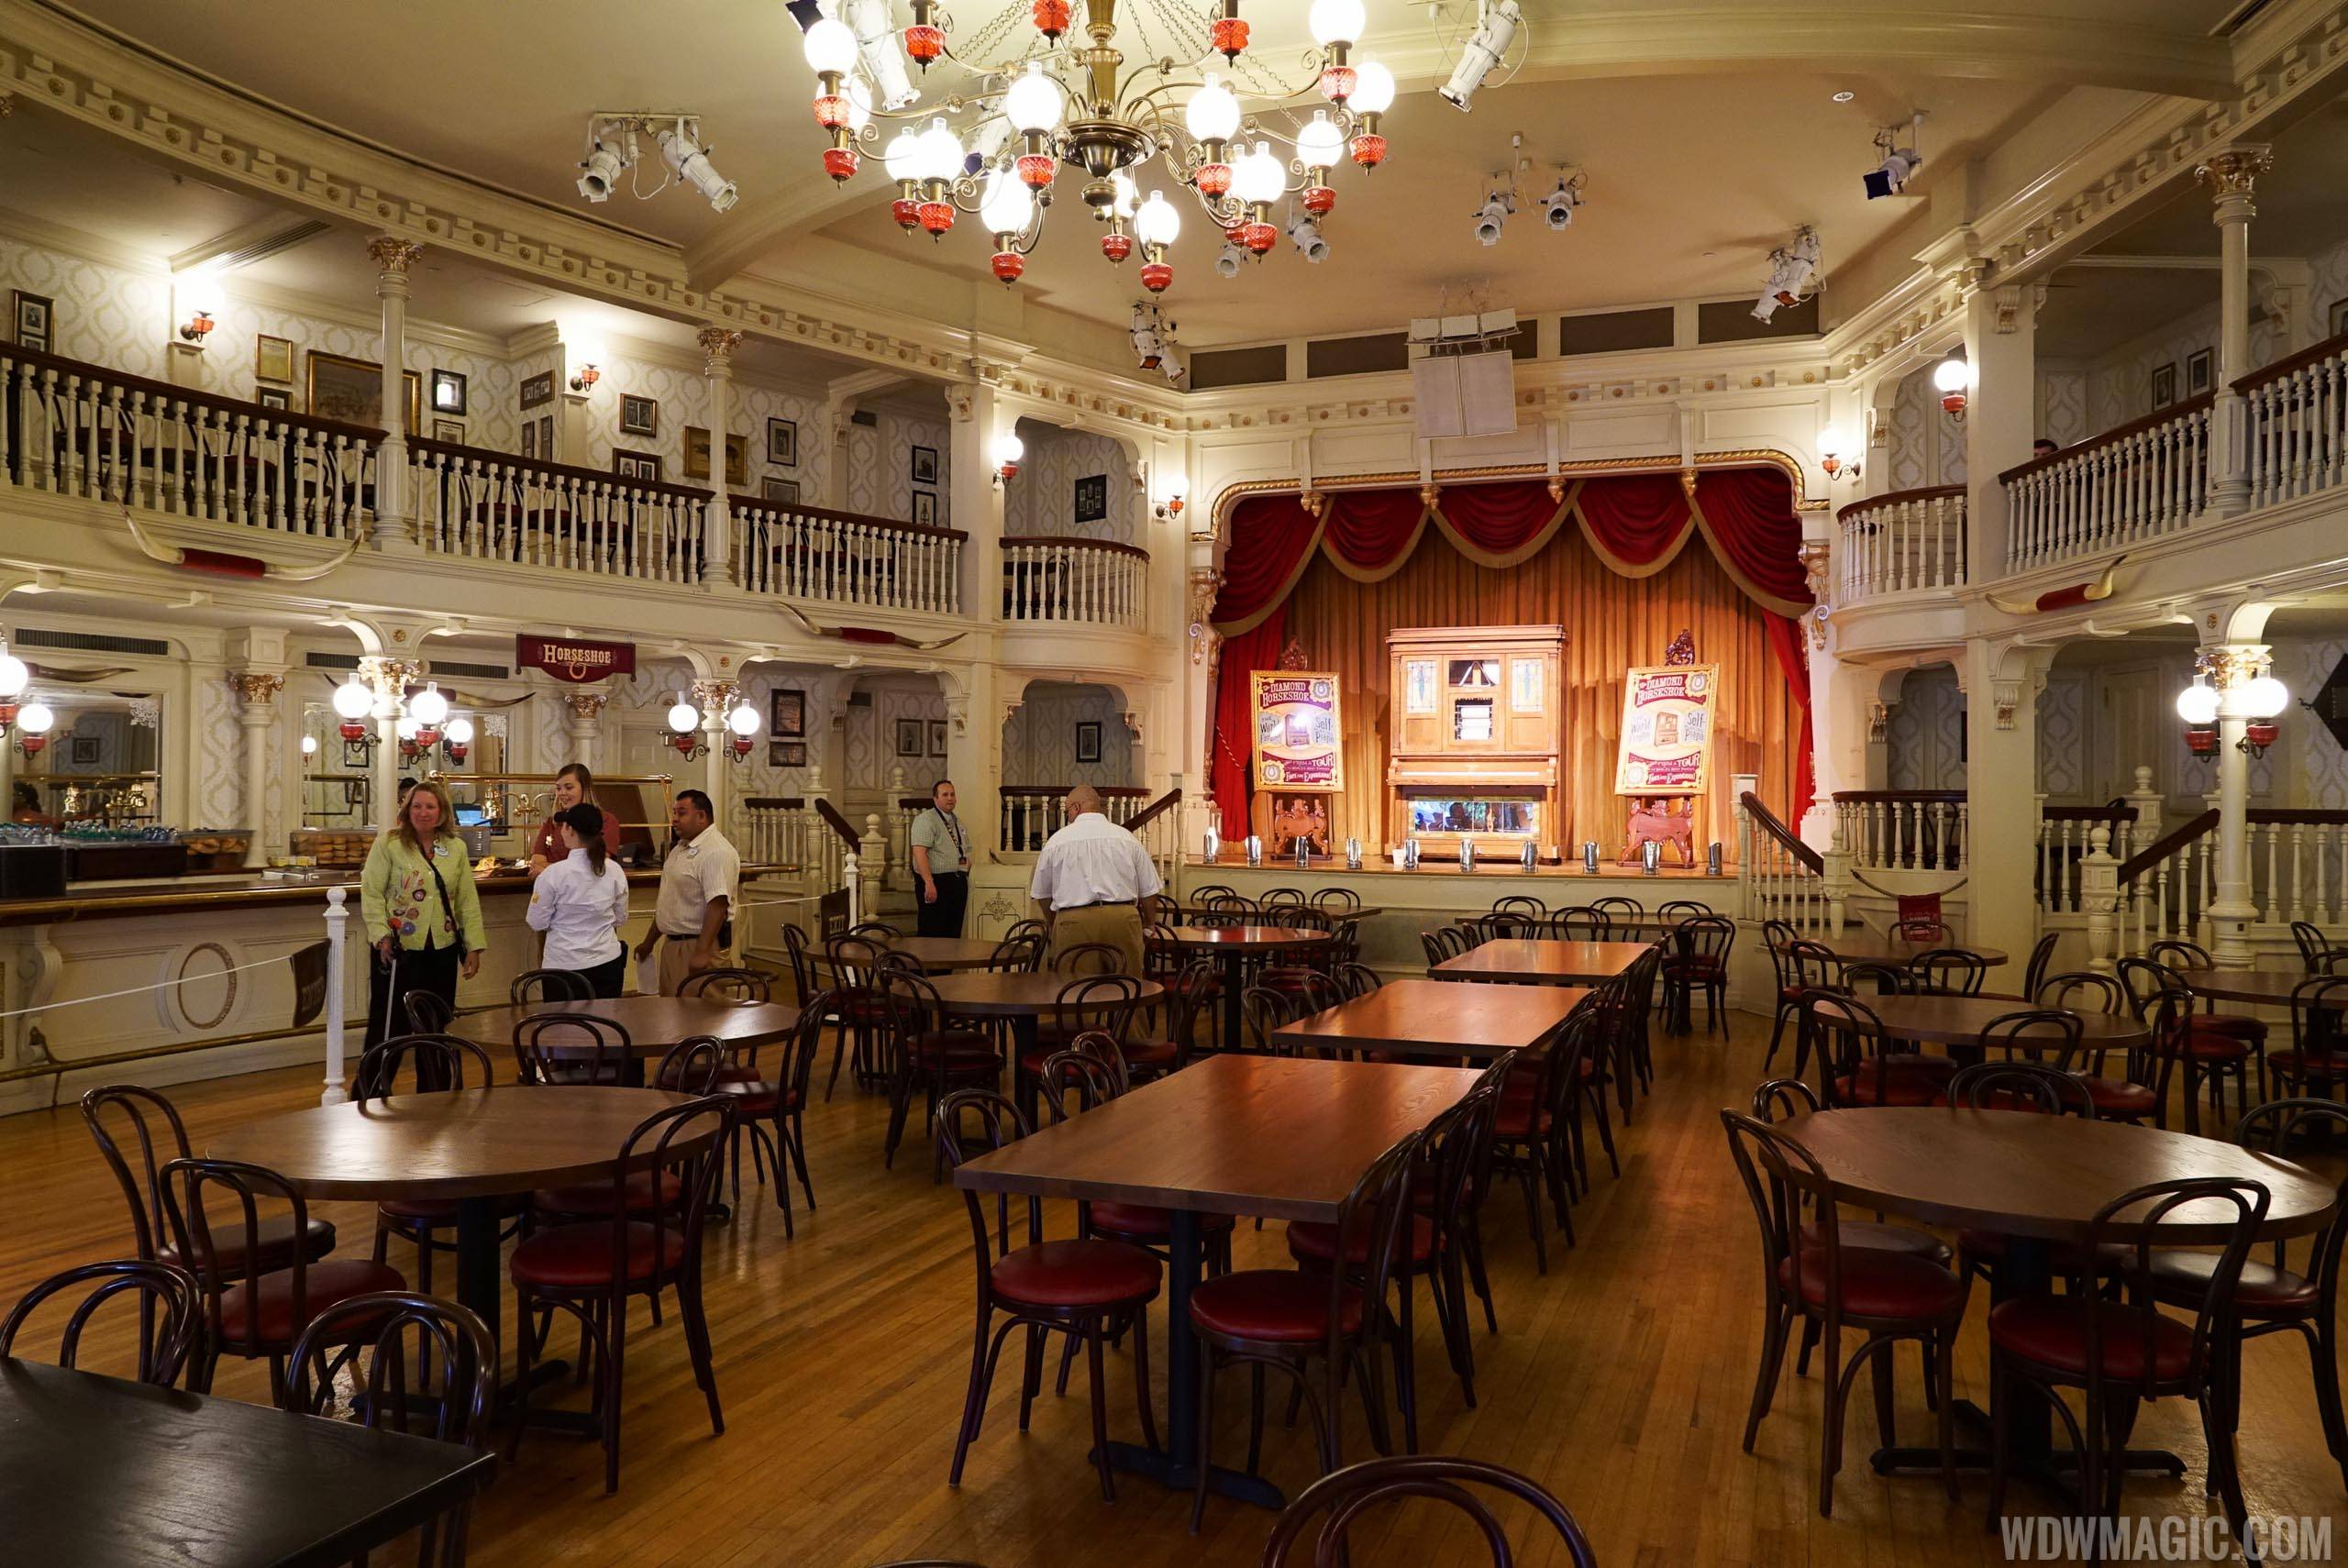 The Diamond Horseshoe opening for lunch and dinner during Thanksgiving week